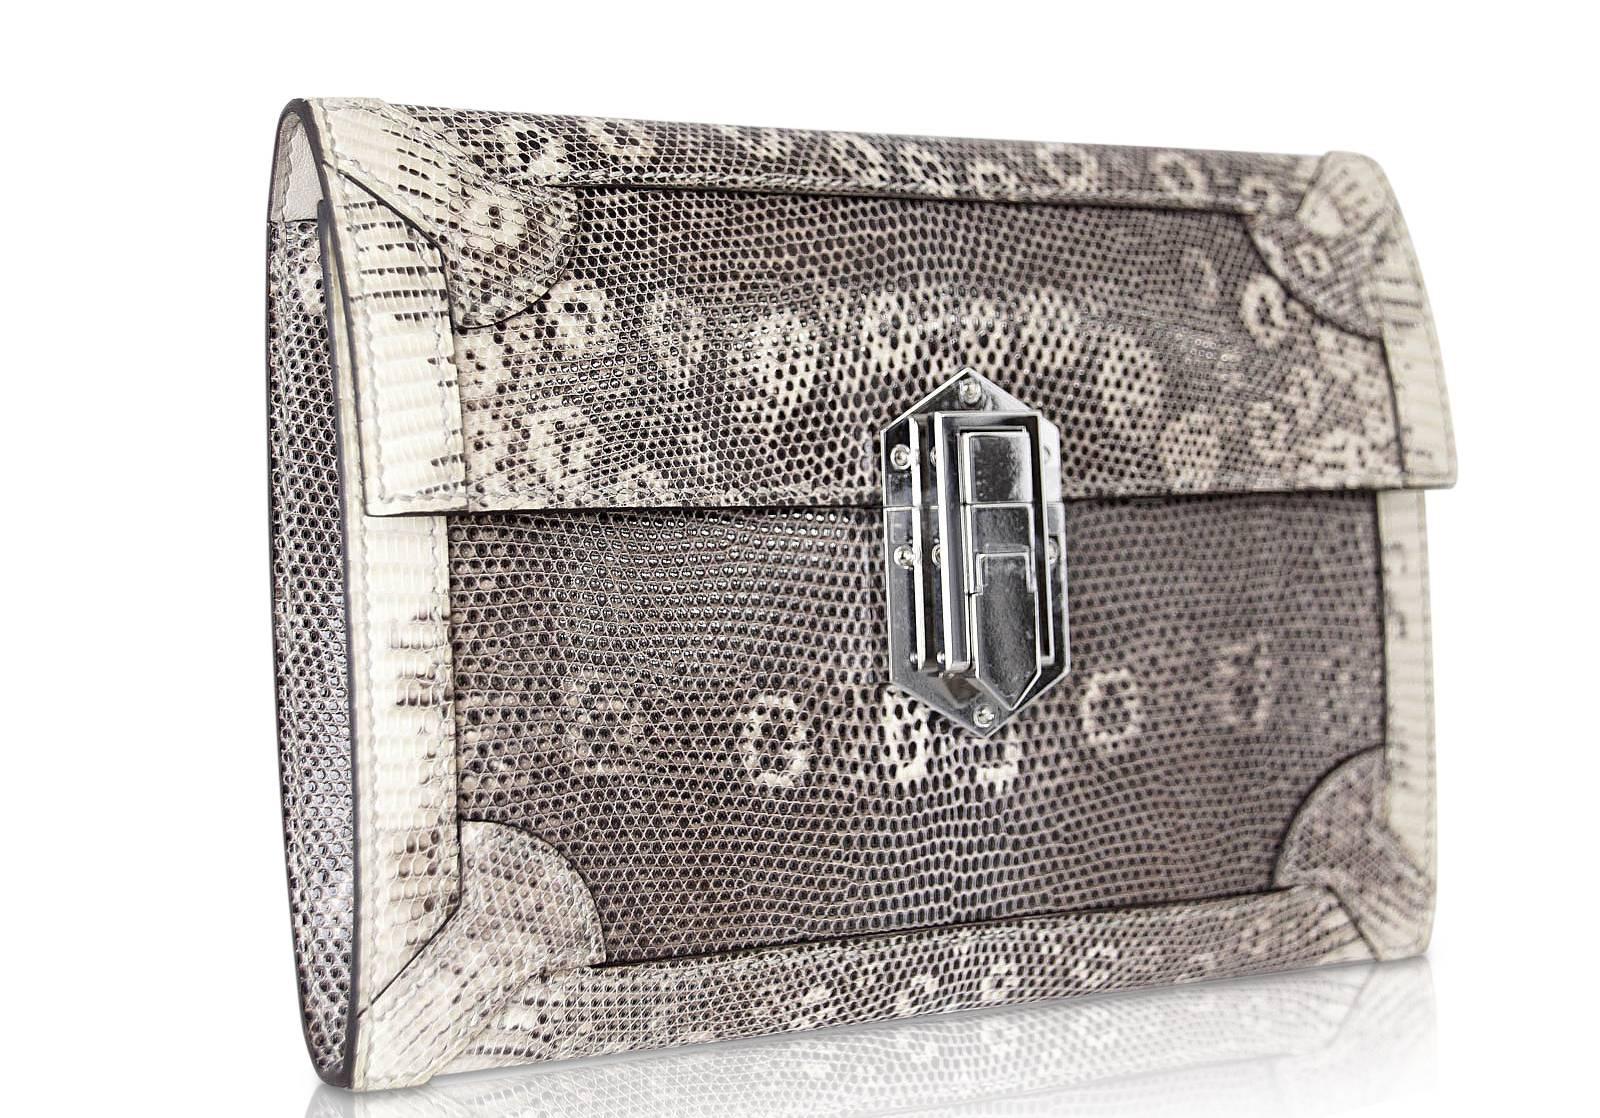 Guaranteed authentic Hermes very rare Fleche d'Or clutch in coveted Ombre lizard.
Unique detailing with a vintage luggage style clasp.
This particular Ombre has exquisite markings.
Signature stamp on interior.
Small interior compartment. 
NEW or